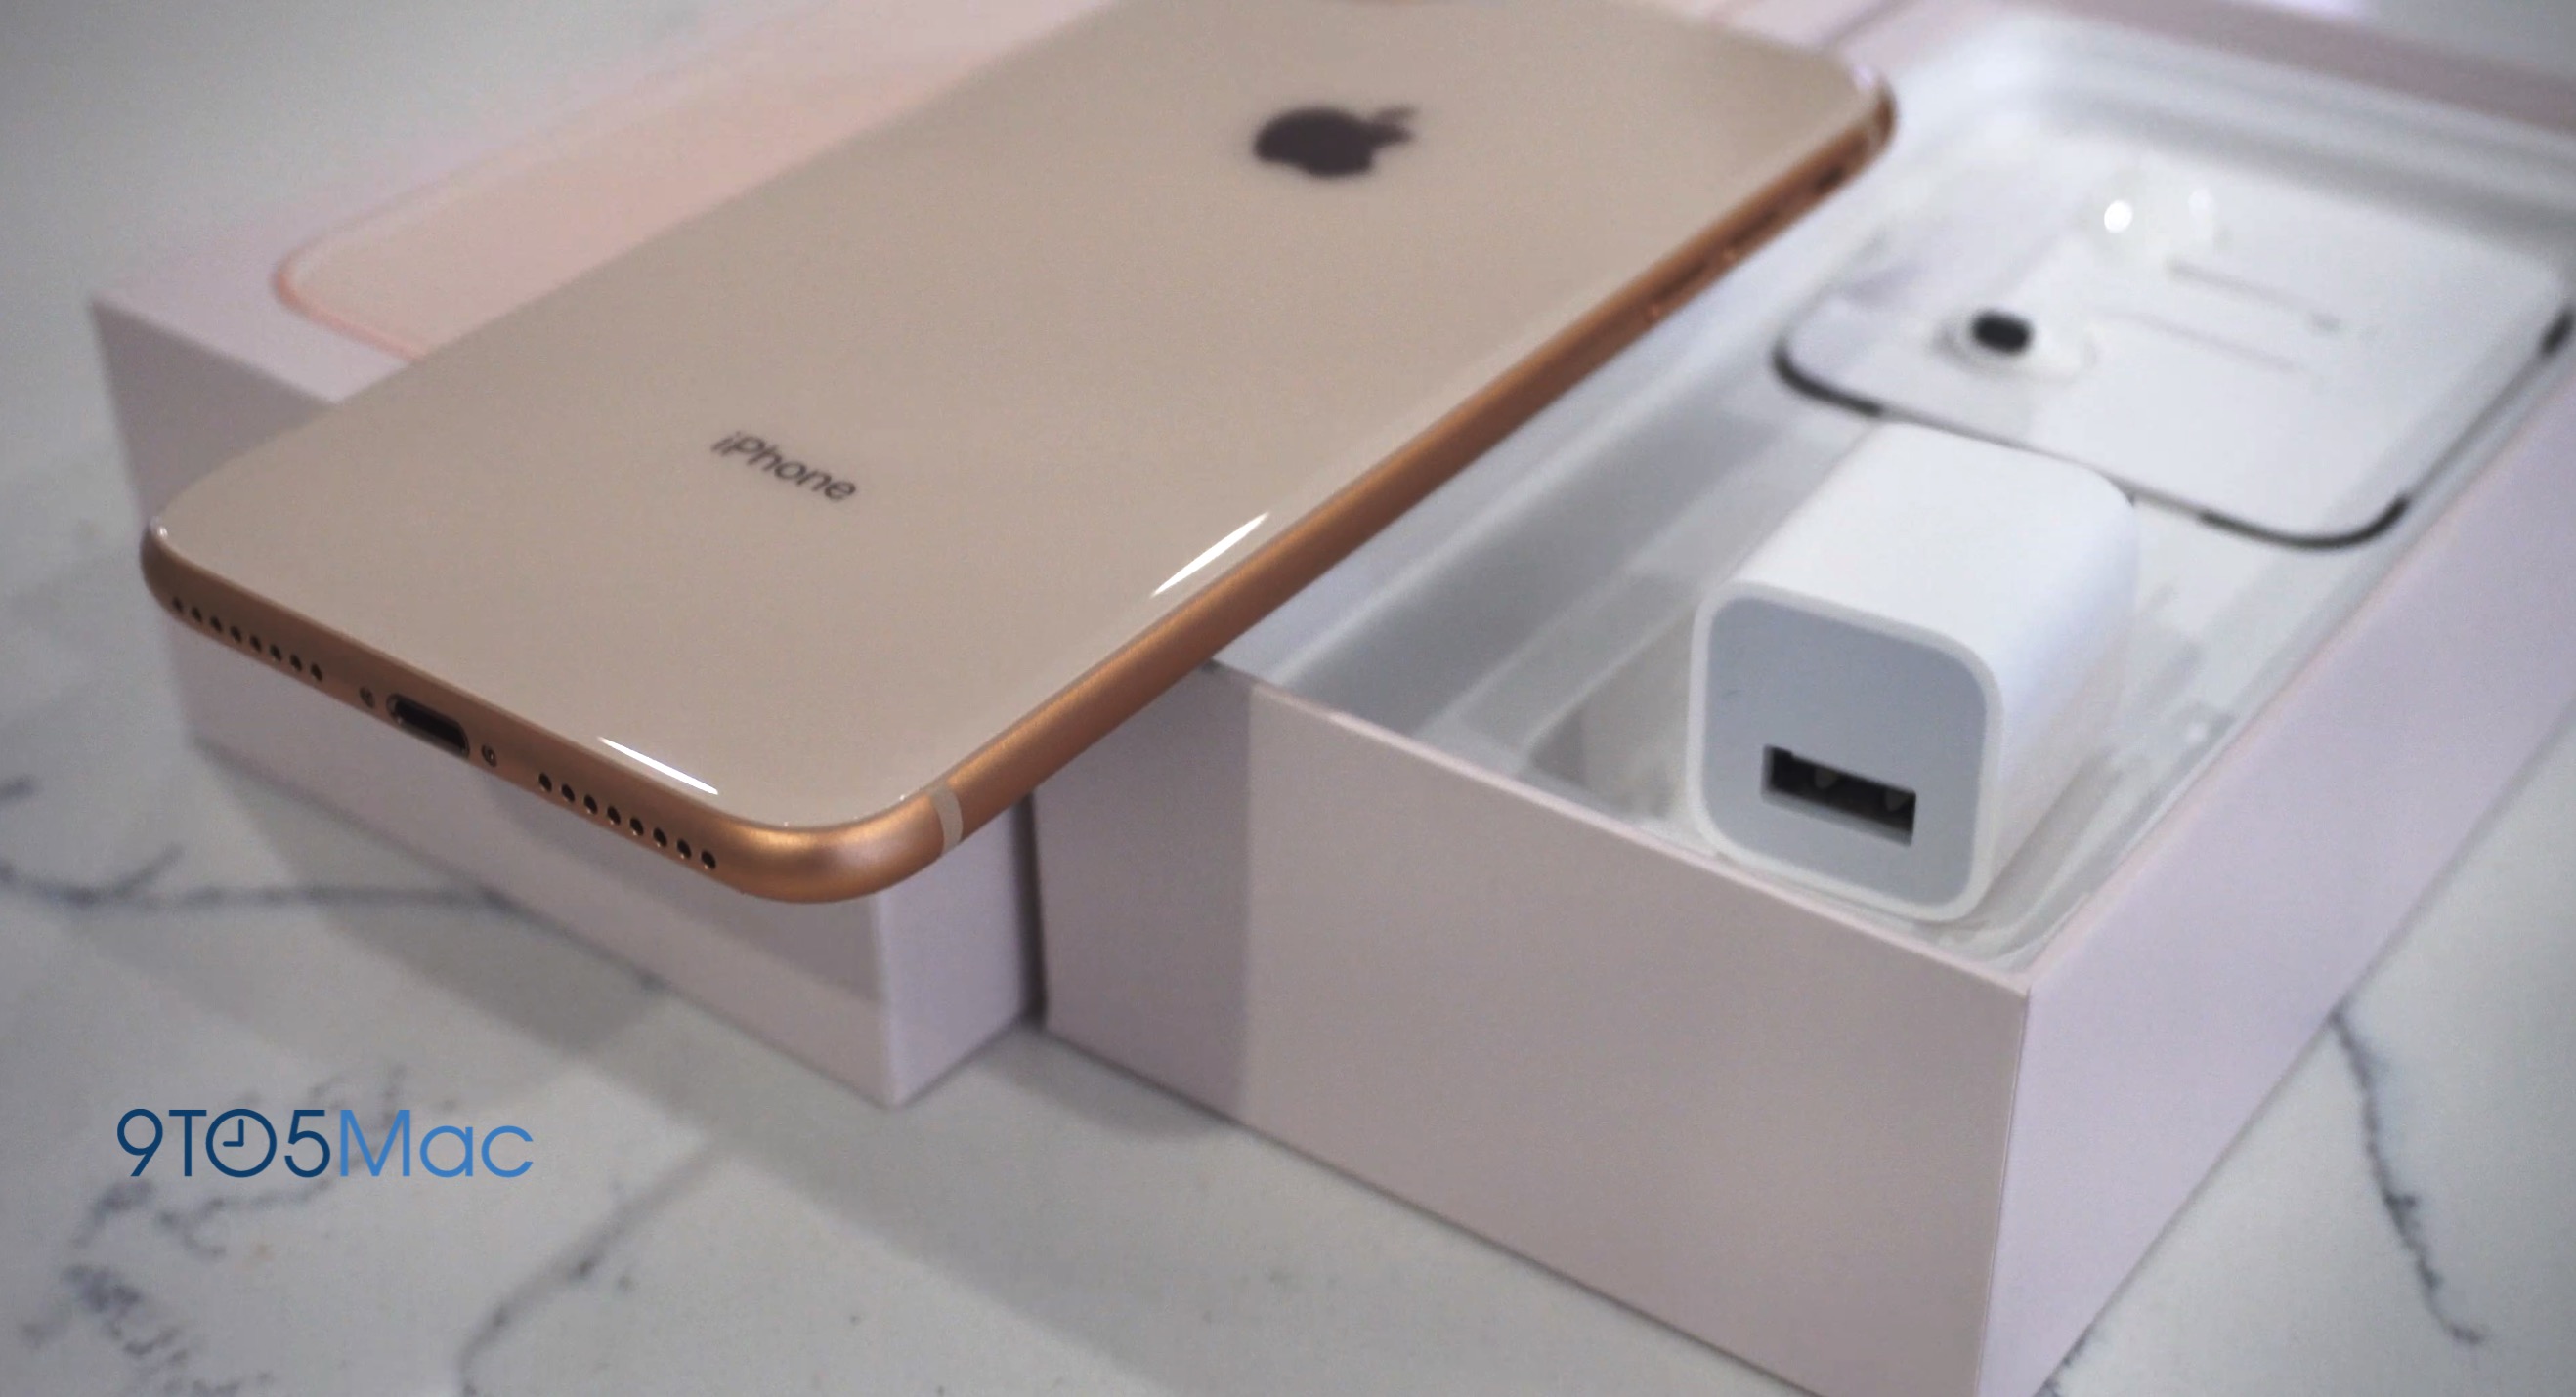 iPhone-8-plus-review-9to5mac-gold